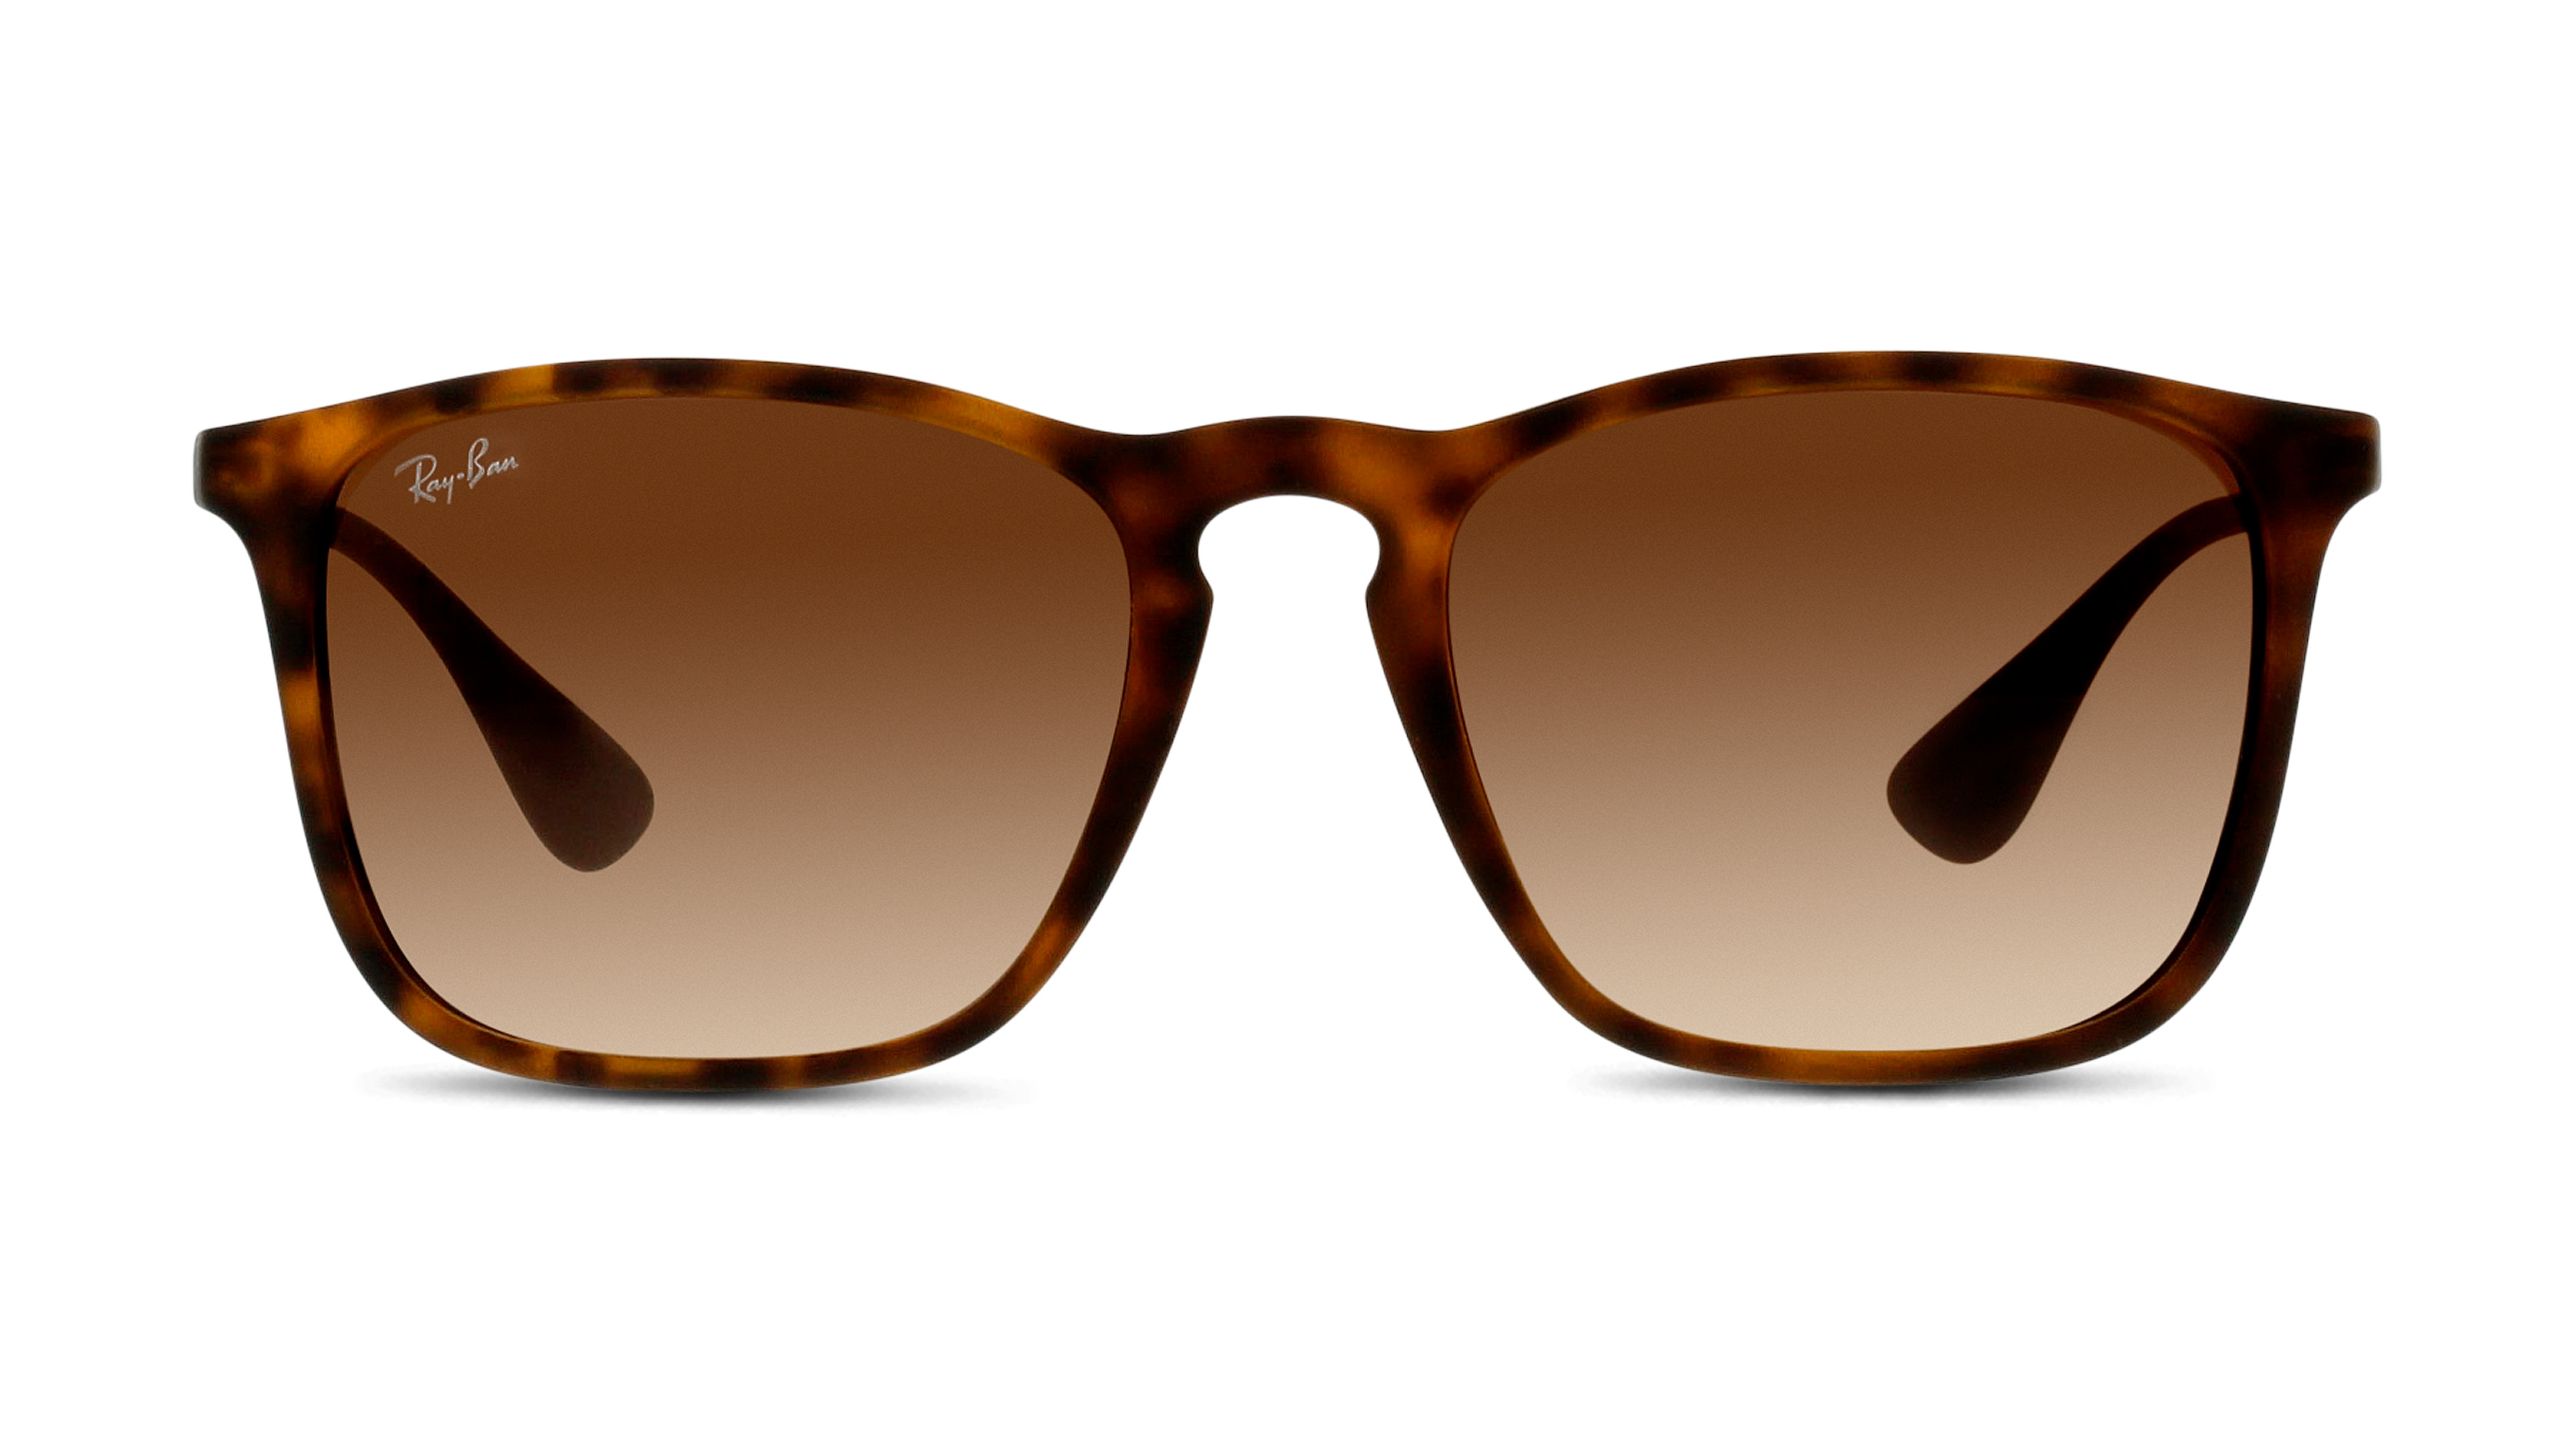 [products.image.front] Ray-Ban CHRIS 0RB4187 856/13 Sonnenbrille